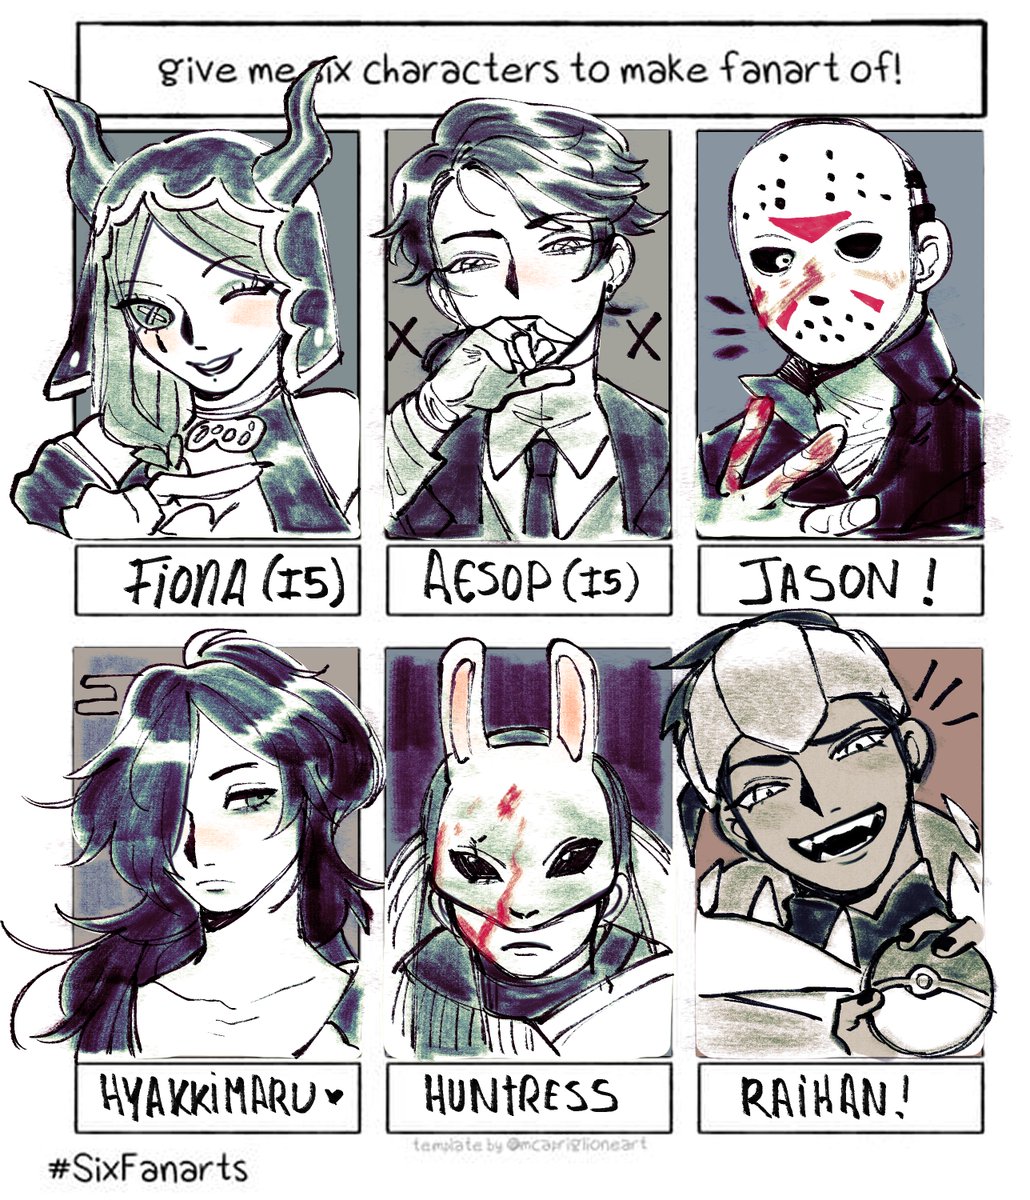 AAAA 
I forgot to post this old sixfanart challenge I did a while ago!
I want to do this again, with sketchs like this 
SOO!! U HAVE SOME REQUESTS? ^^

#SixFanartsChallenge #SixFanarts #IdentityV #identityVイラスト 